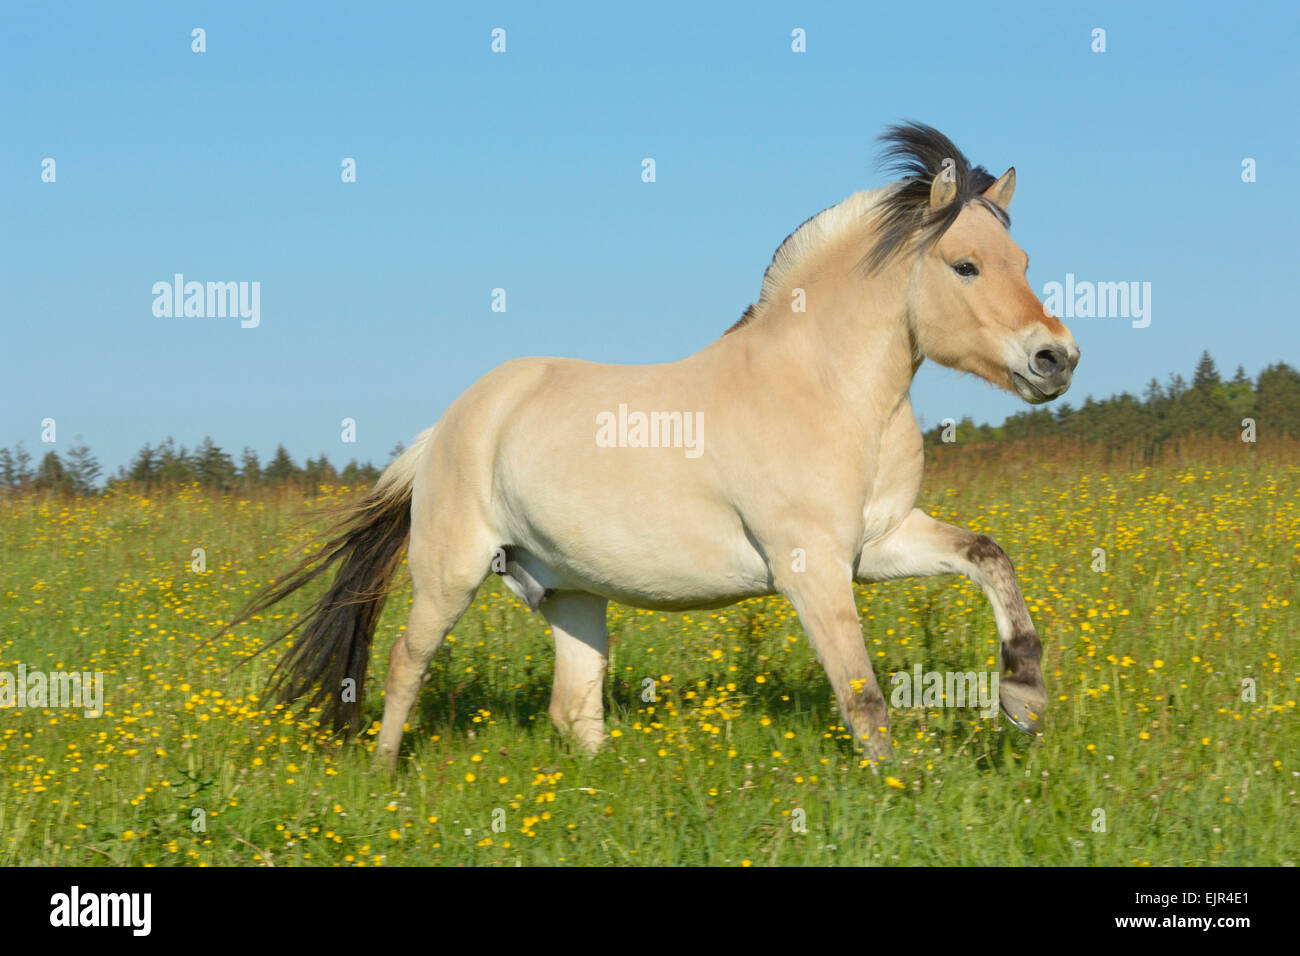 4-year-old Norwegian Fjord horse galloping in a meadow Stock Photo